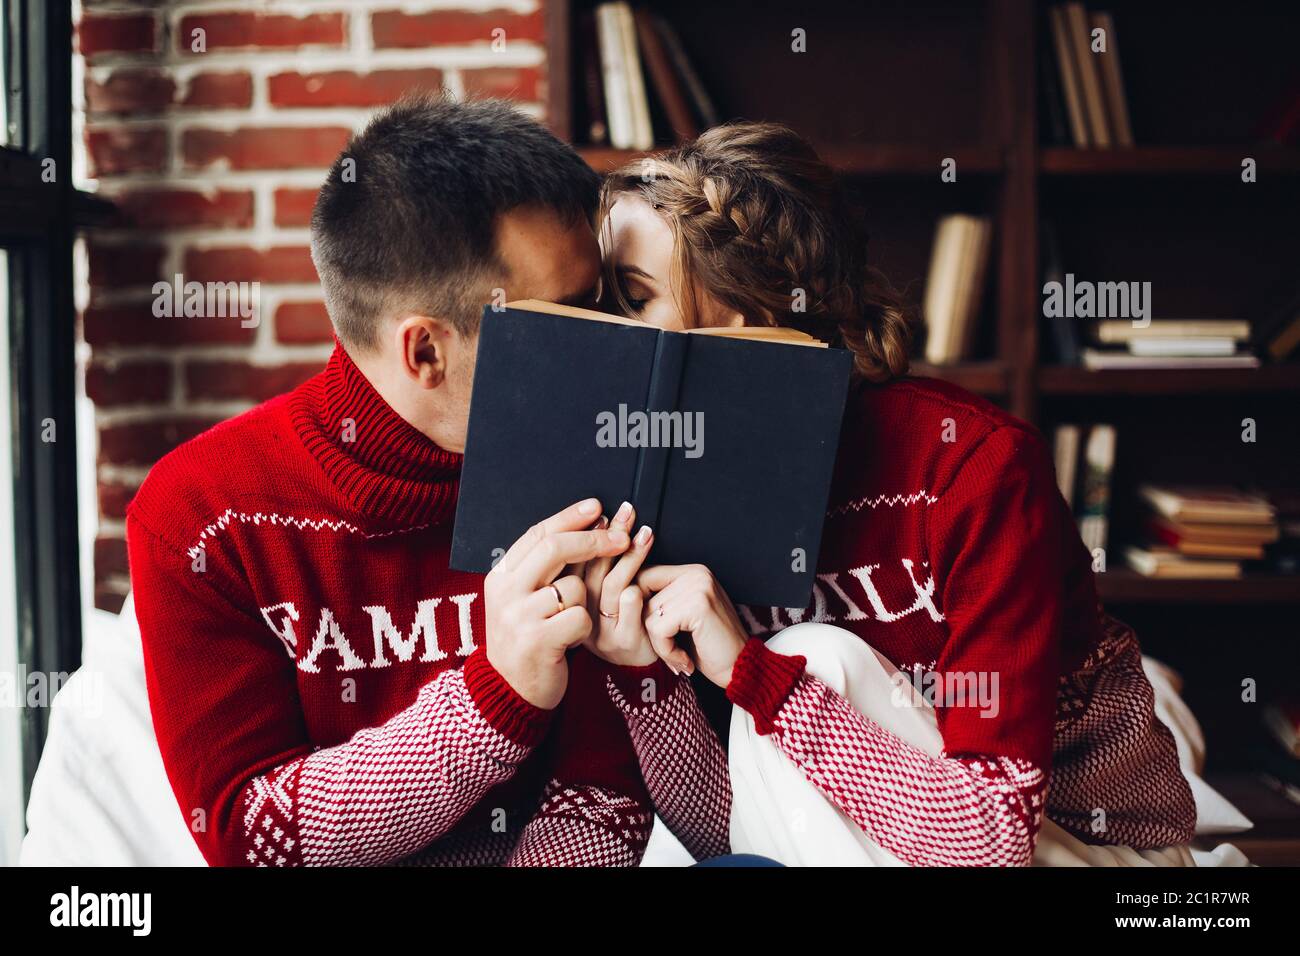 Loving couple in winter jumpers kissing hiding behind the book. Stock Photo